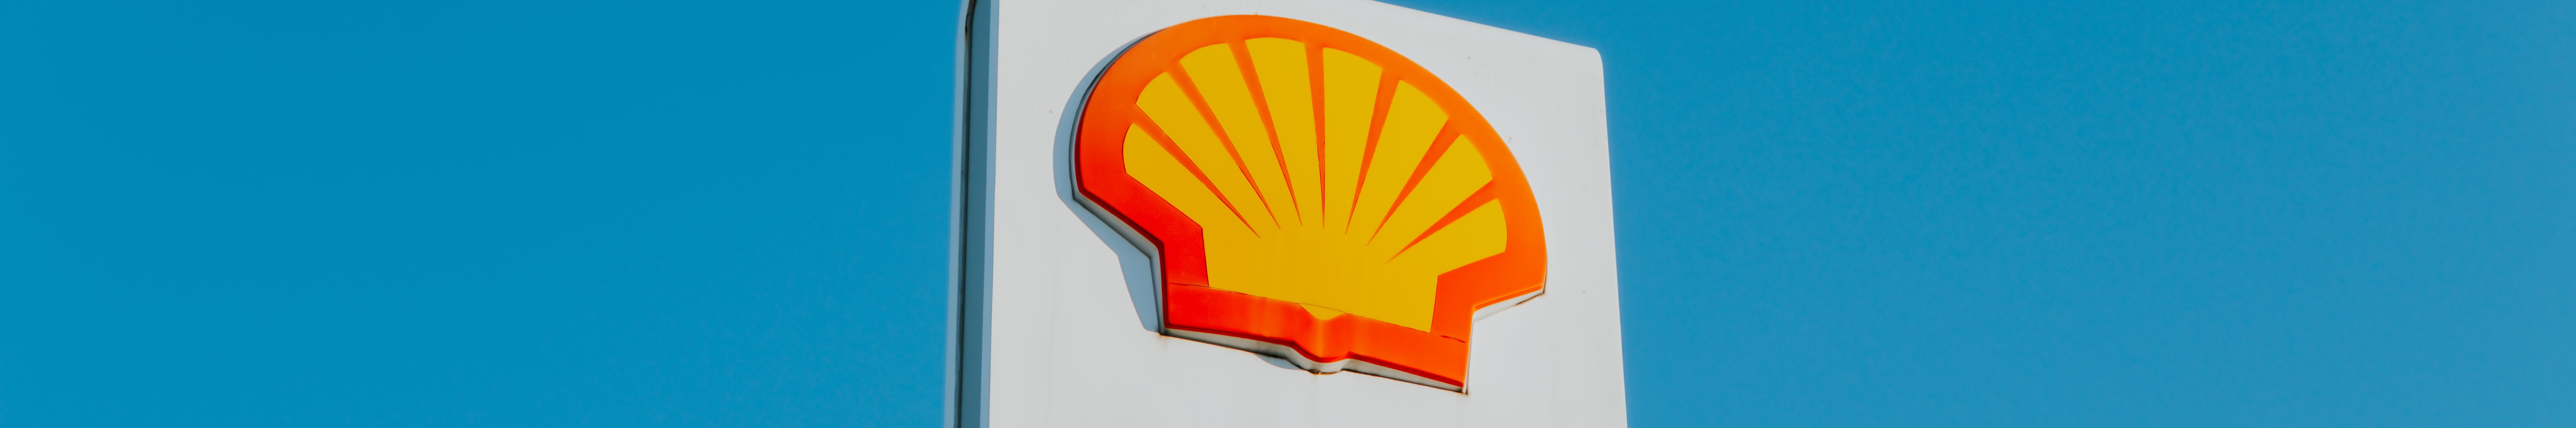 The Royal Dutch Shell involves in labor rights violations against its Nigerian contractors